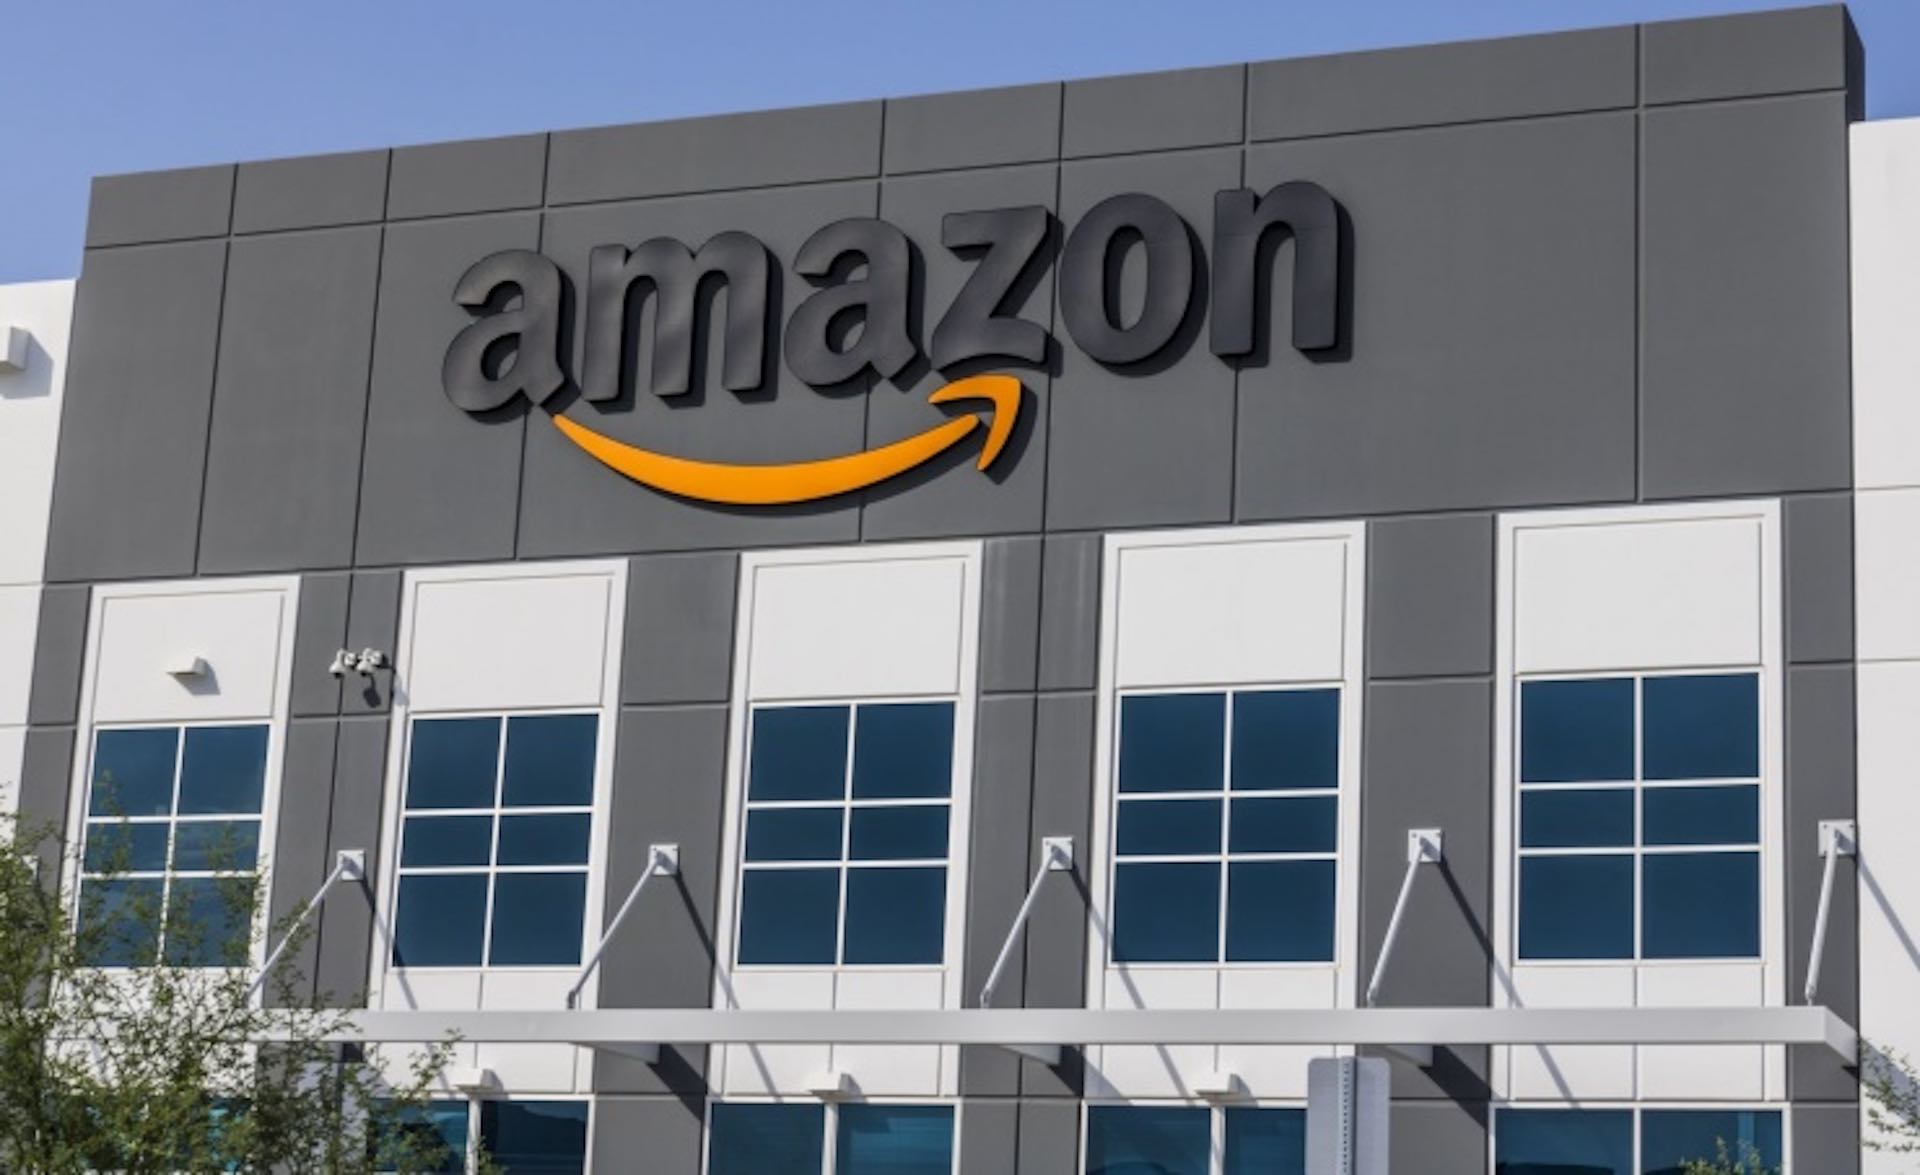 Warehouse and transportation workers at Amazon receive higher hourly wages